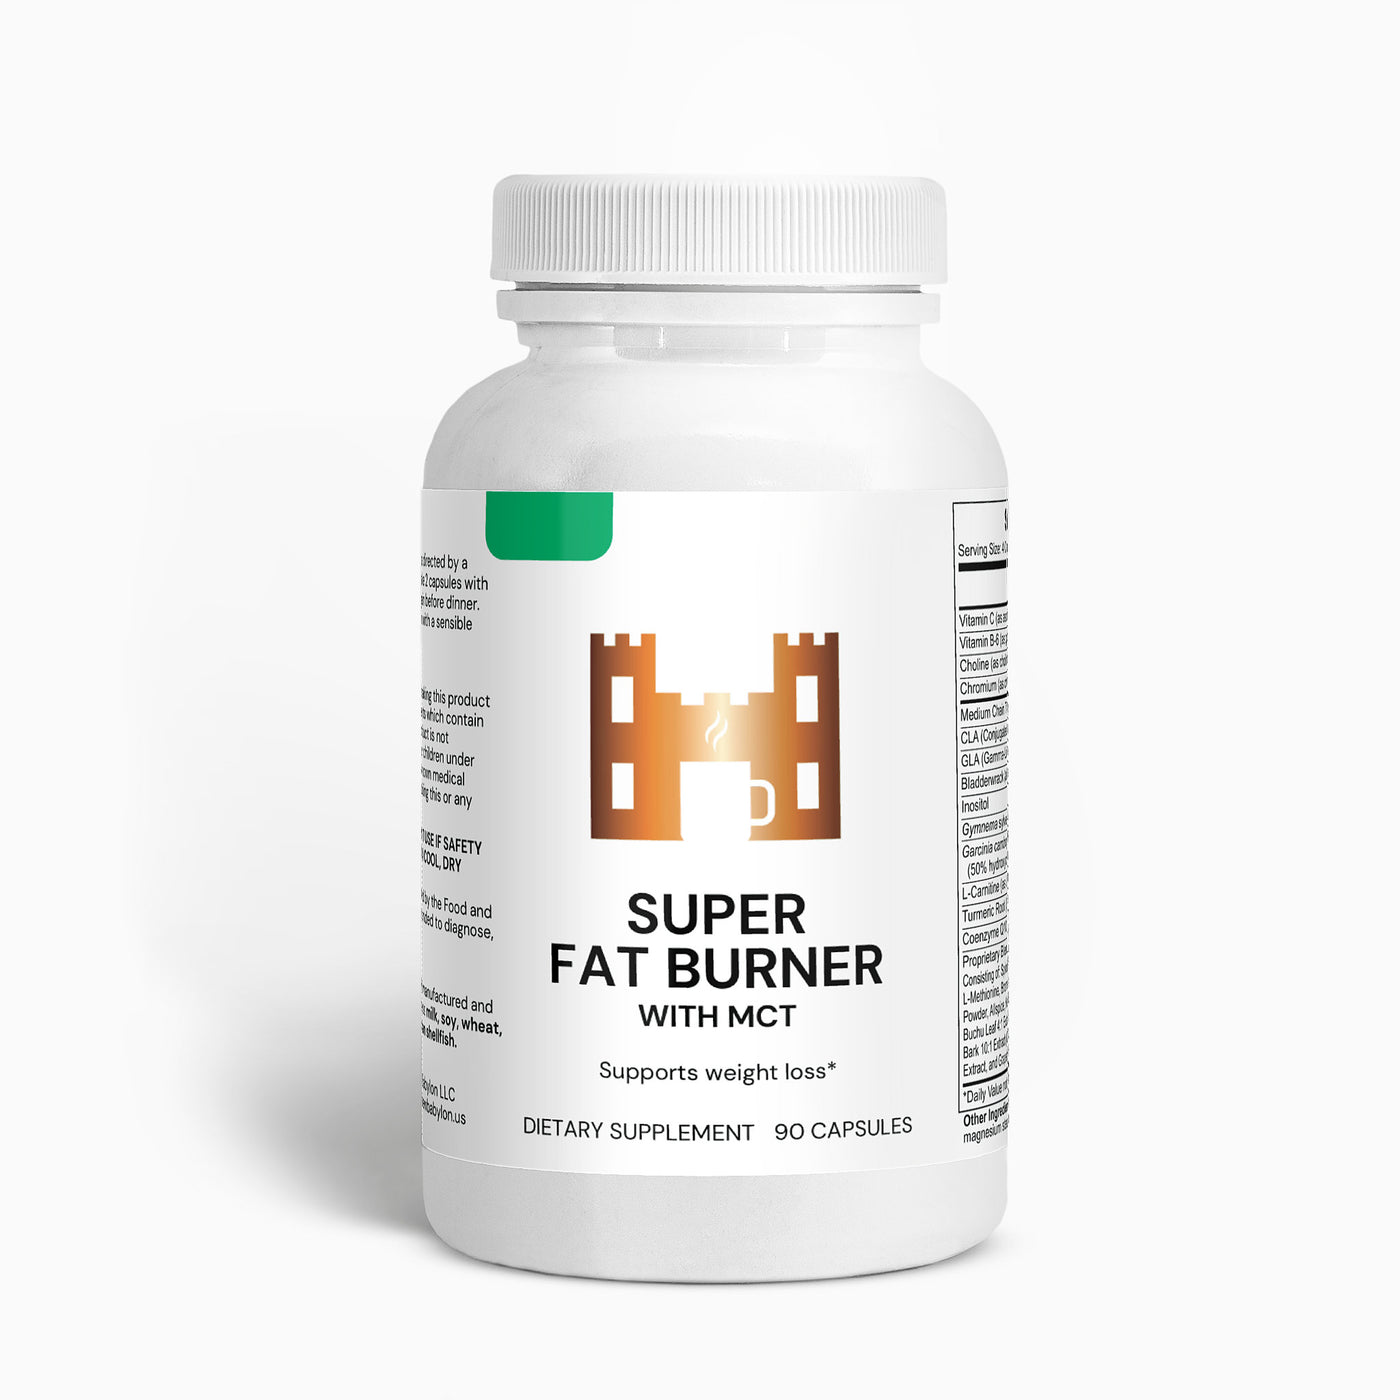 Super Fat Burner with MCT - New Babylon Coffee